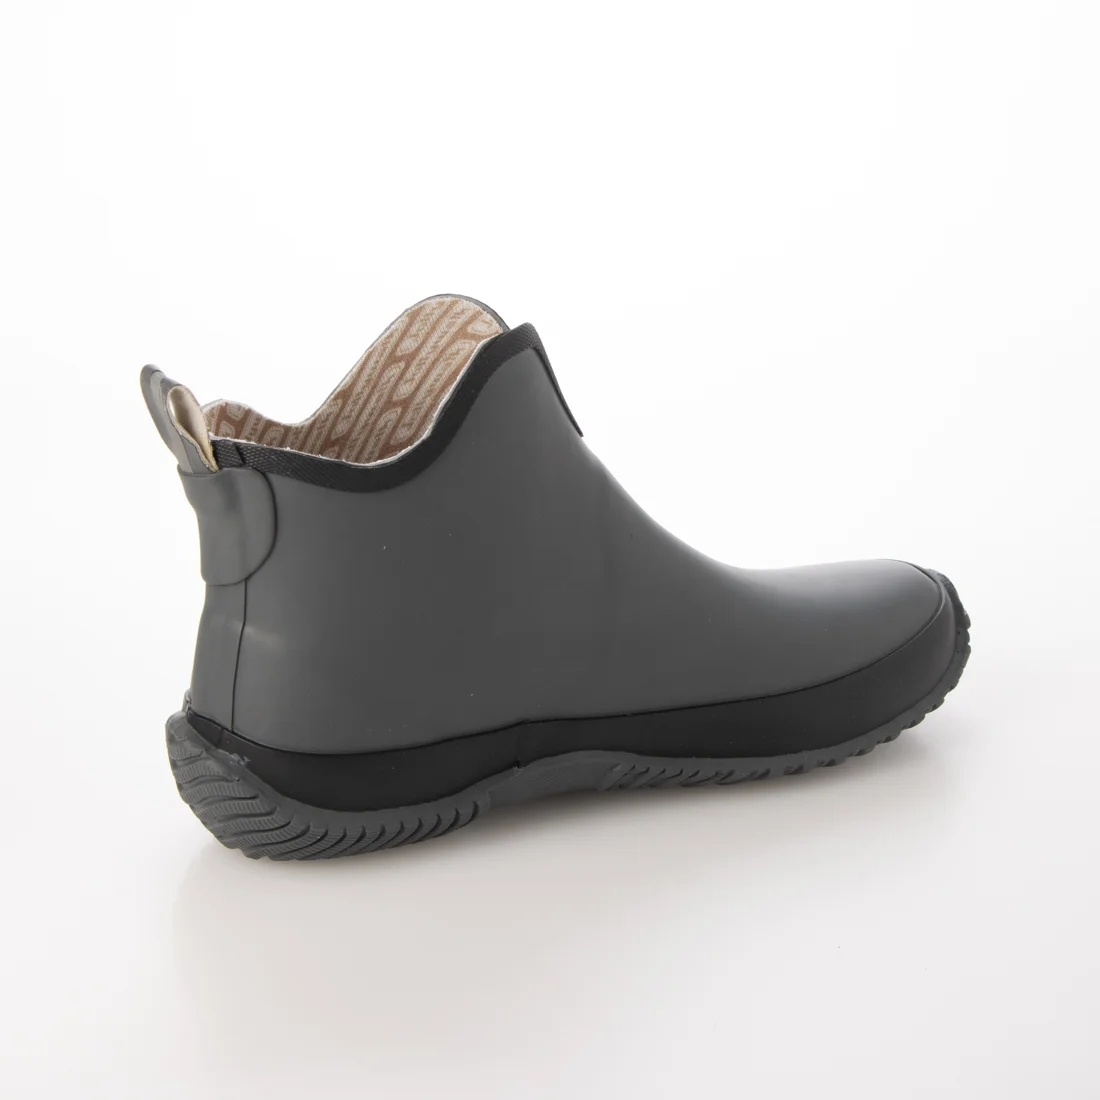  men's rain boots rain shoes boots rain shoes natural rubber material new goods [20089-gry-250]25.0cm stock one . sale 